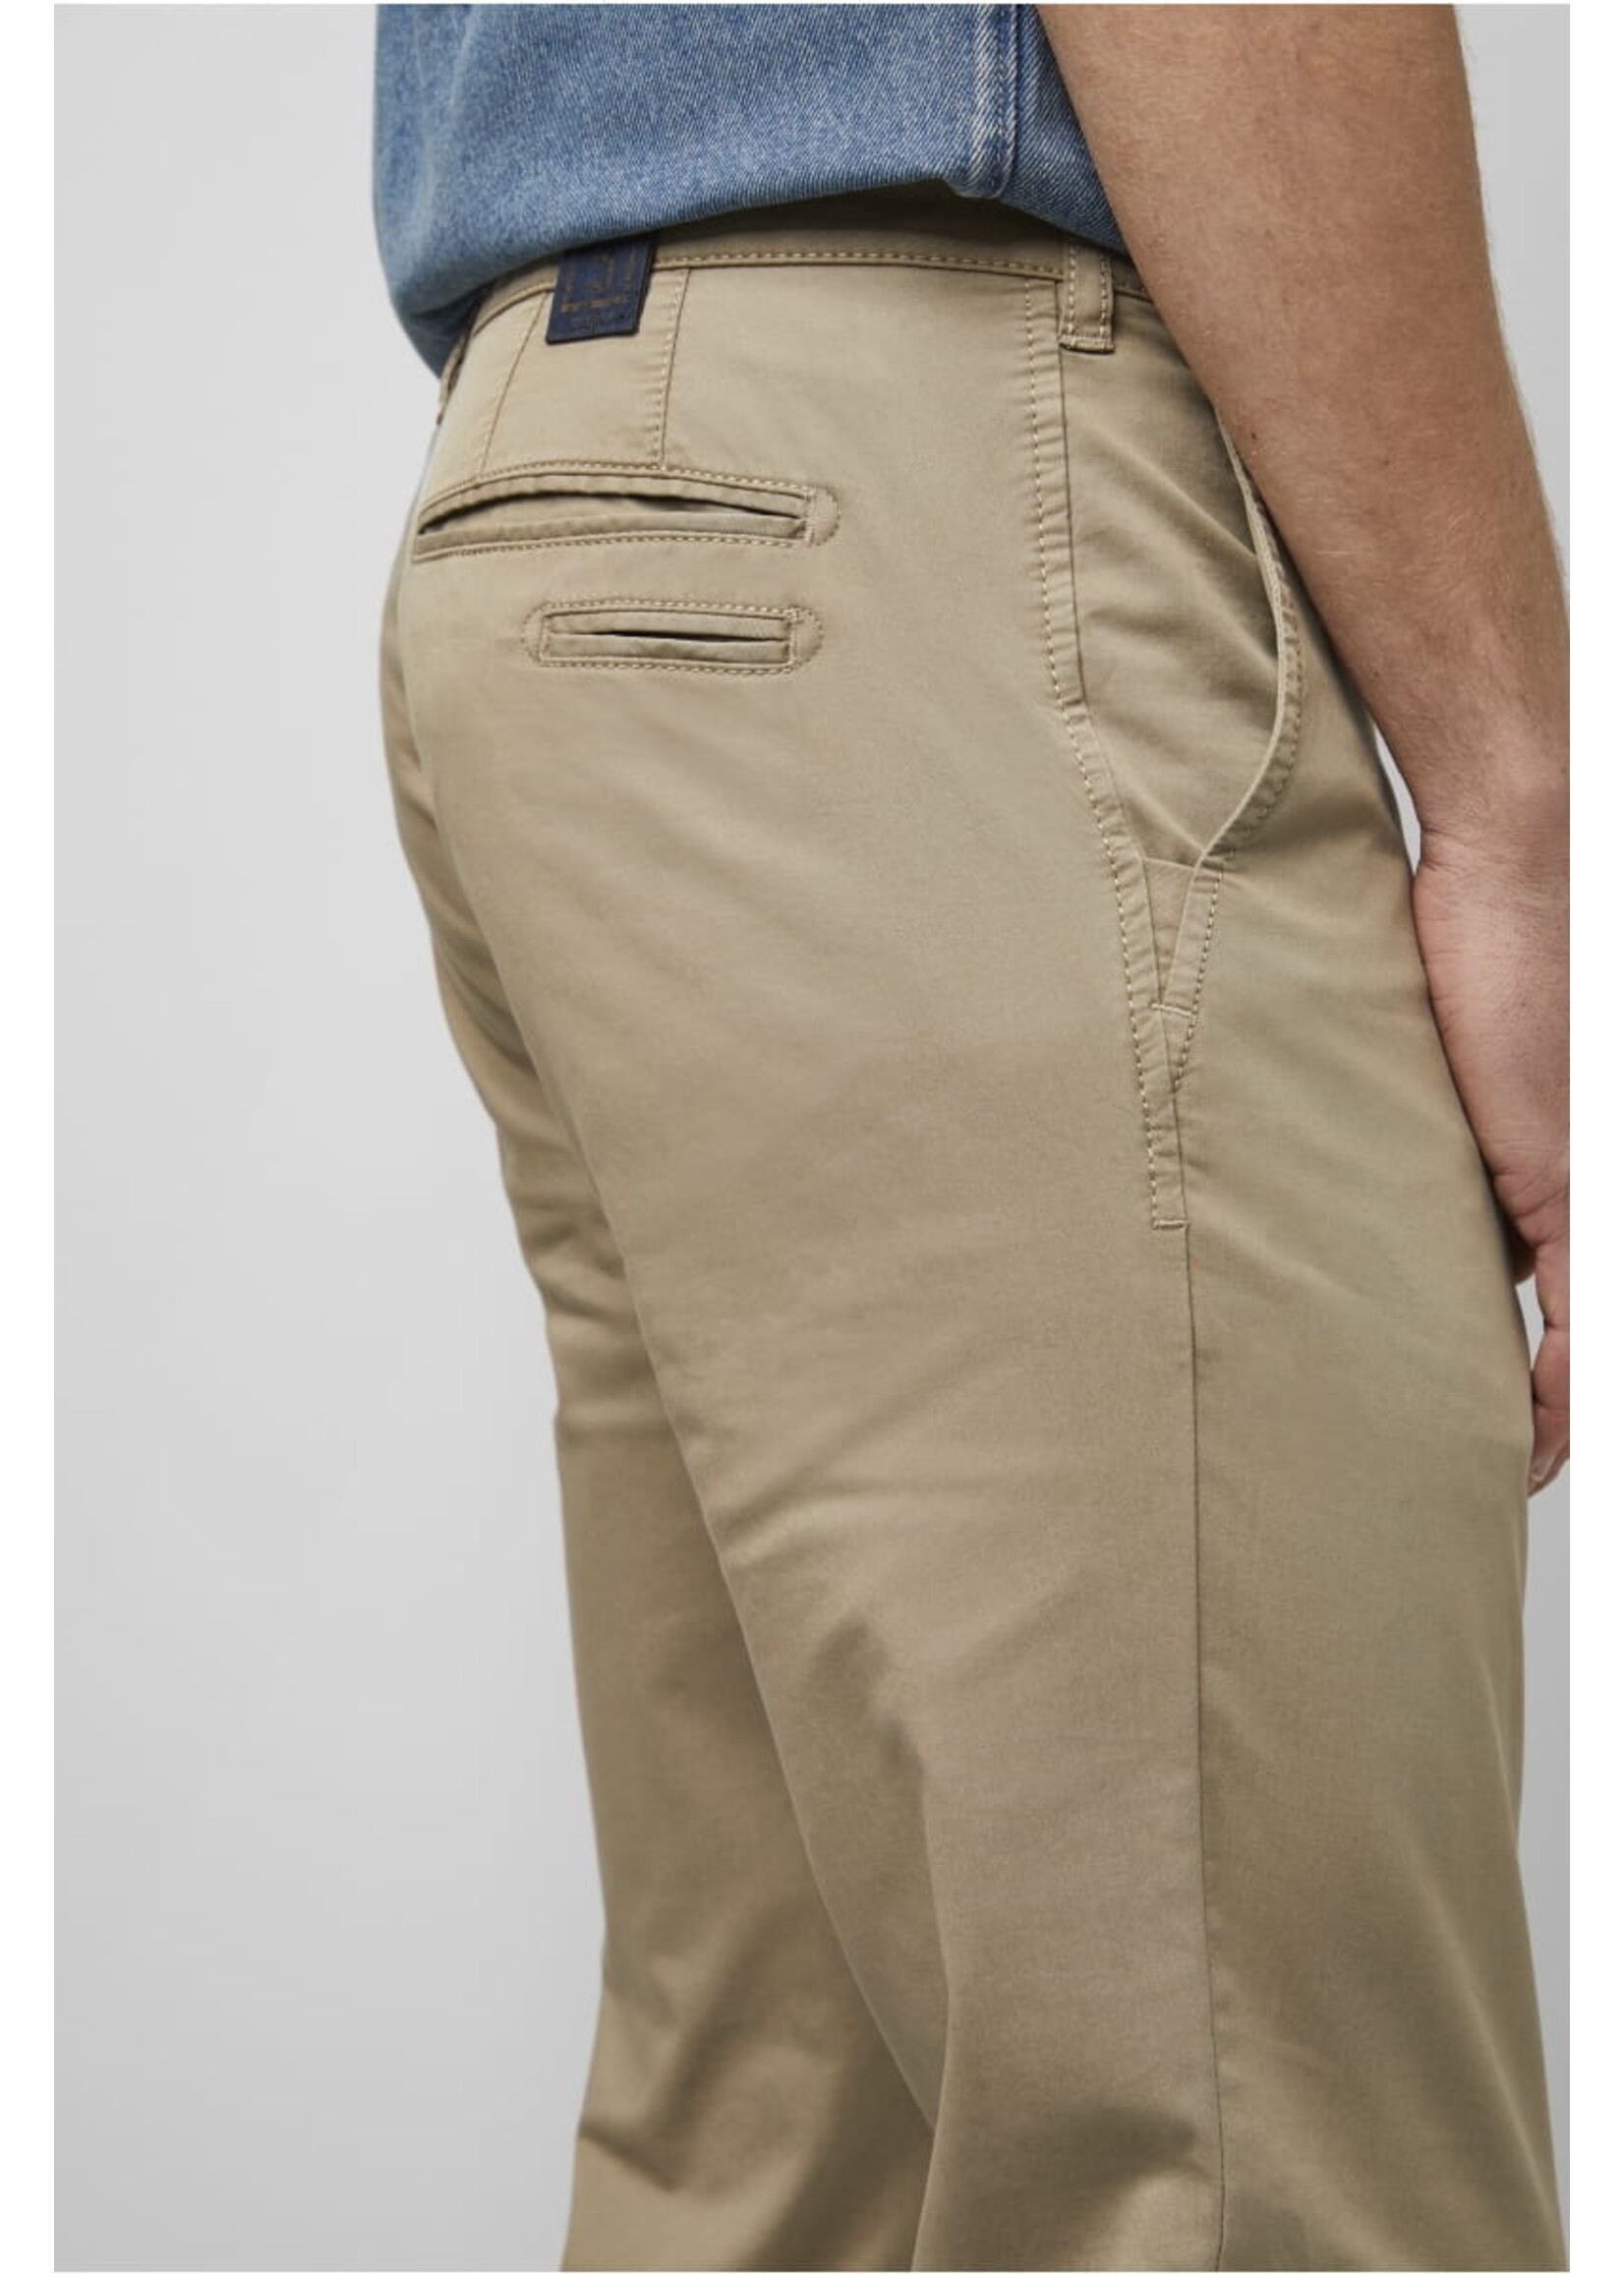 Meyer Meyer - M5 Fit - Casual Chino